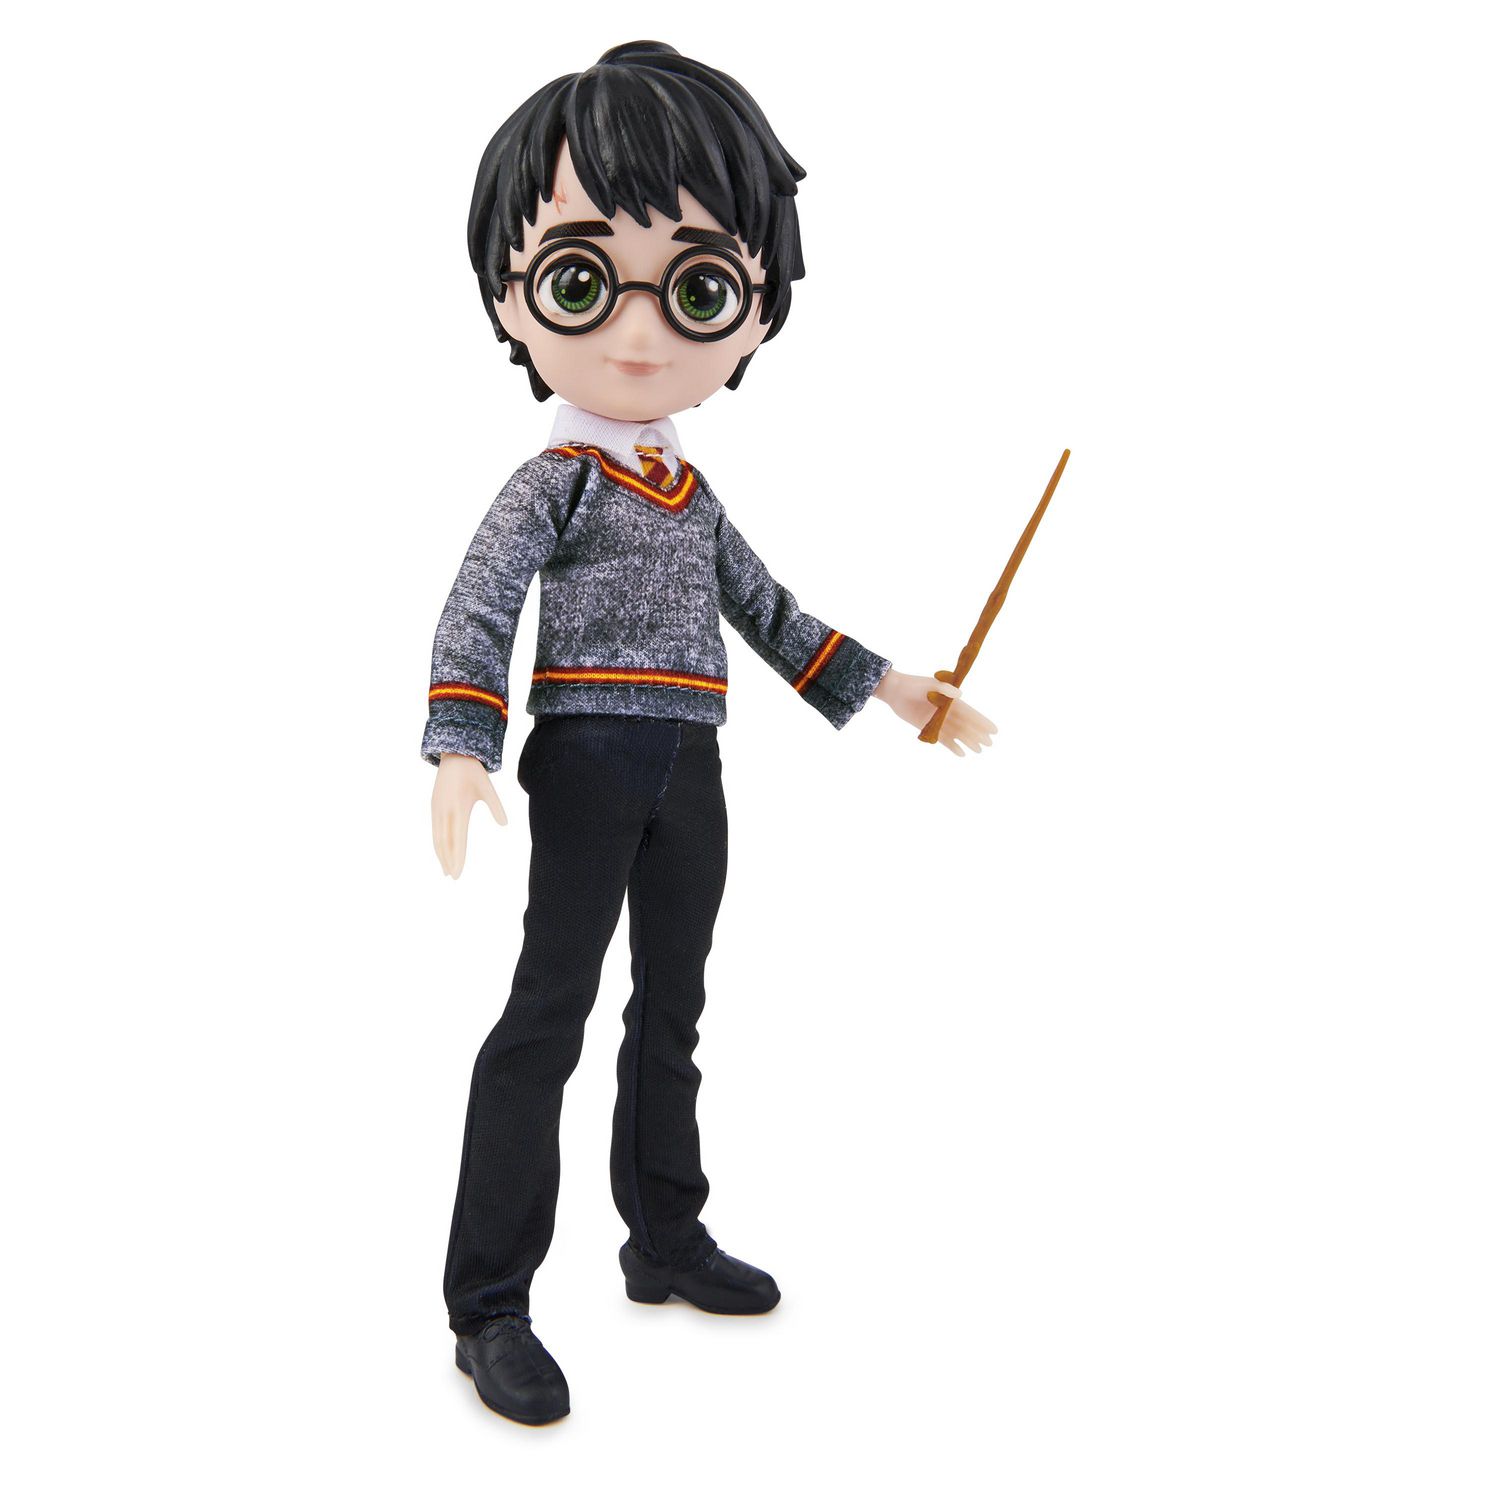 Potter　Wizarding　Harry　Toys　World,　8-inch　up　Doll,　and　Kids　for　Girls　Ages